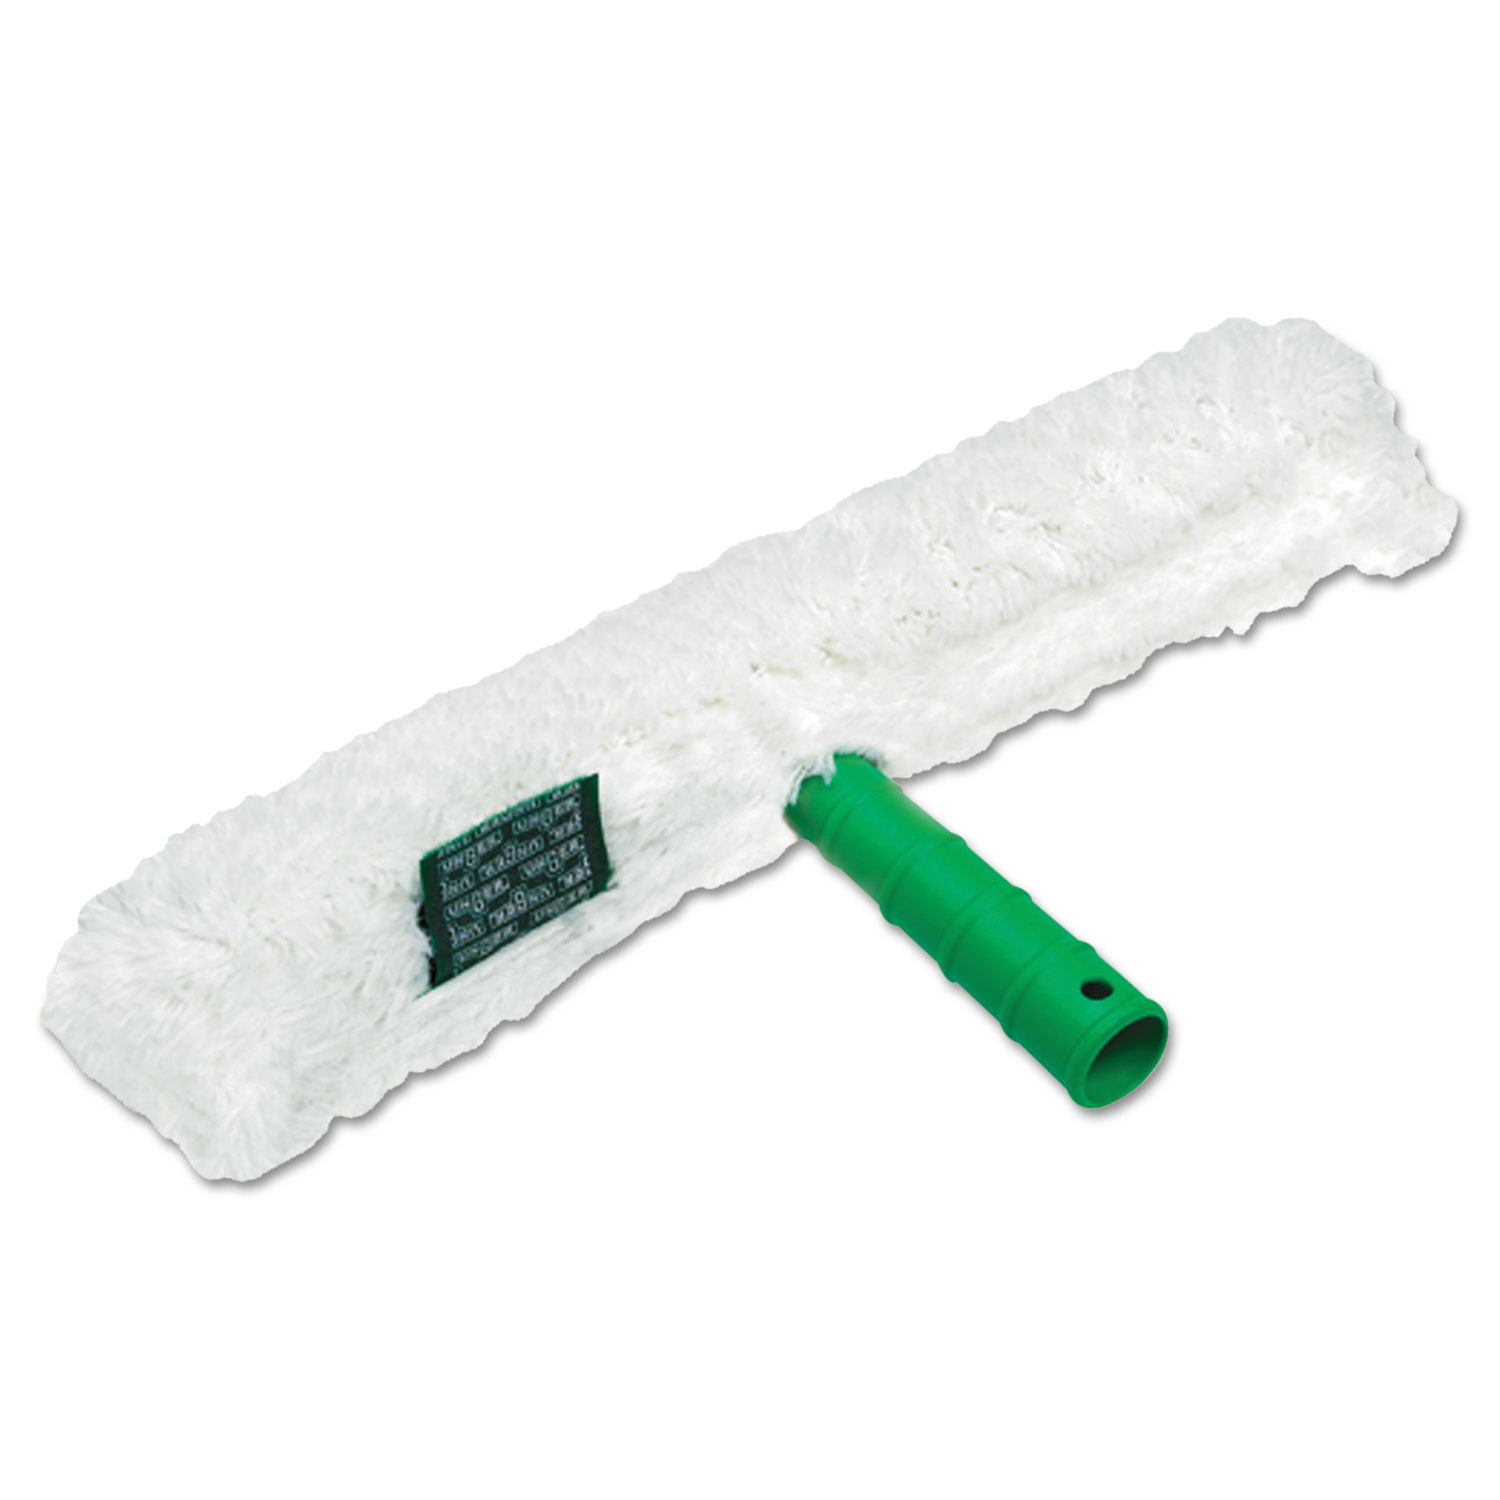  Unger WC250 Original Strip Washer with Green Nylon Handle, White Cloth Sleeve, 10 Inches (UNGWC250) 